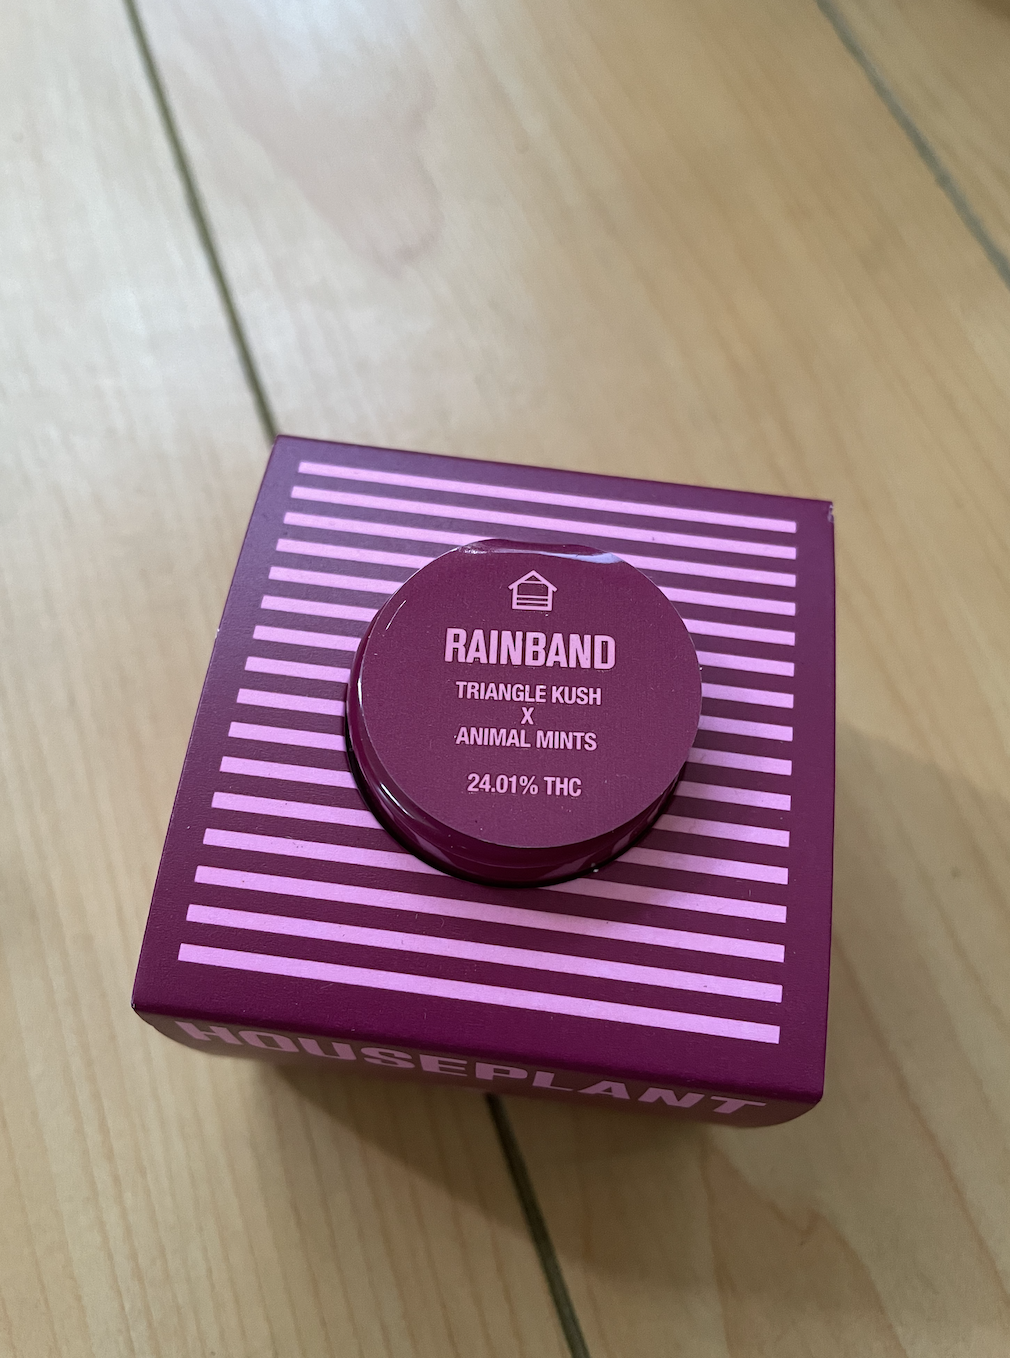 An image of the packaging for the strain &quot;Rainband&quot;